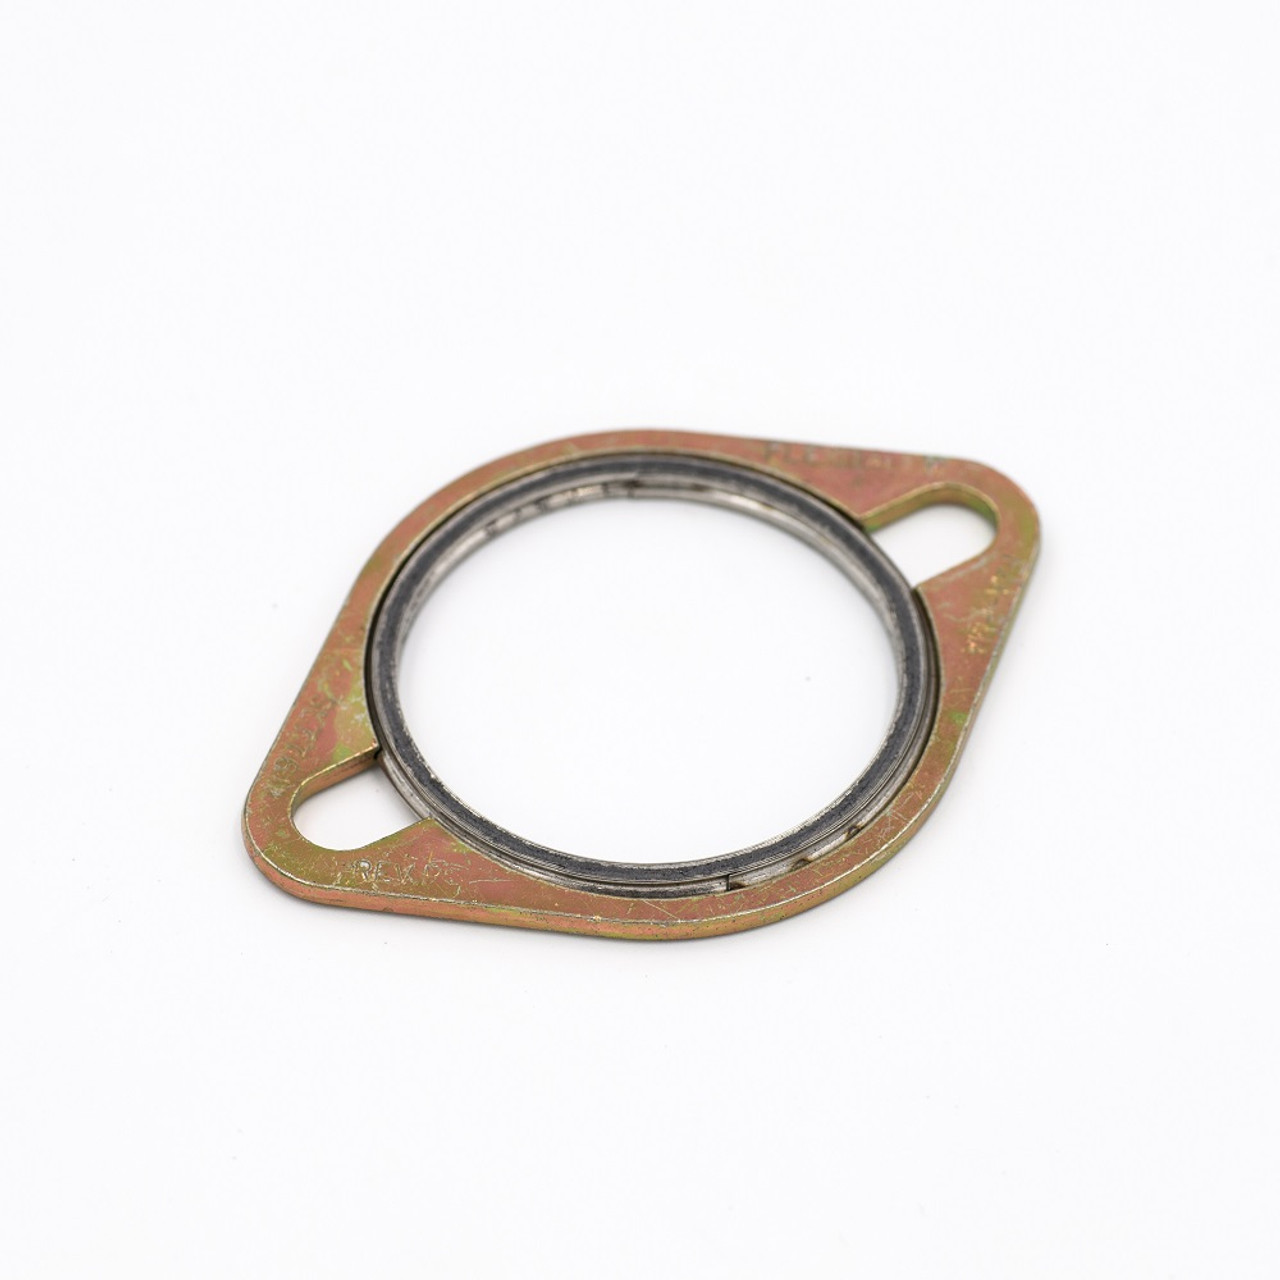 SL77611 exhaust gasket replaces the Airborne 1000 and the Lycoming 77611. Exhaust gasket is used on all Lycoming engines with the 2 hole exhaust flange.